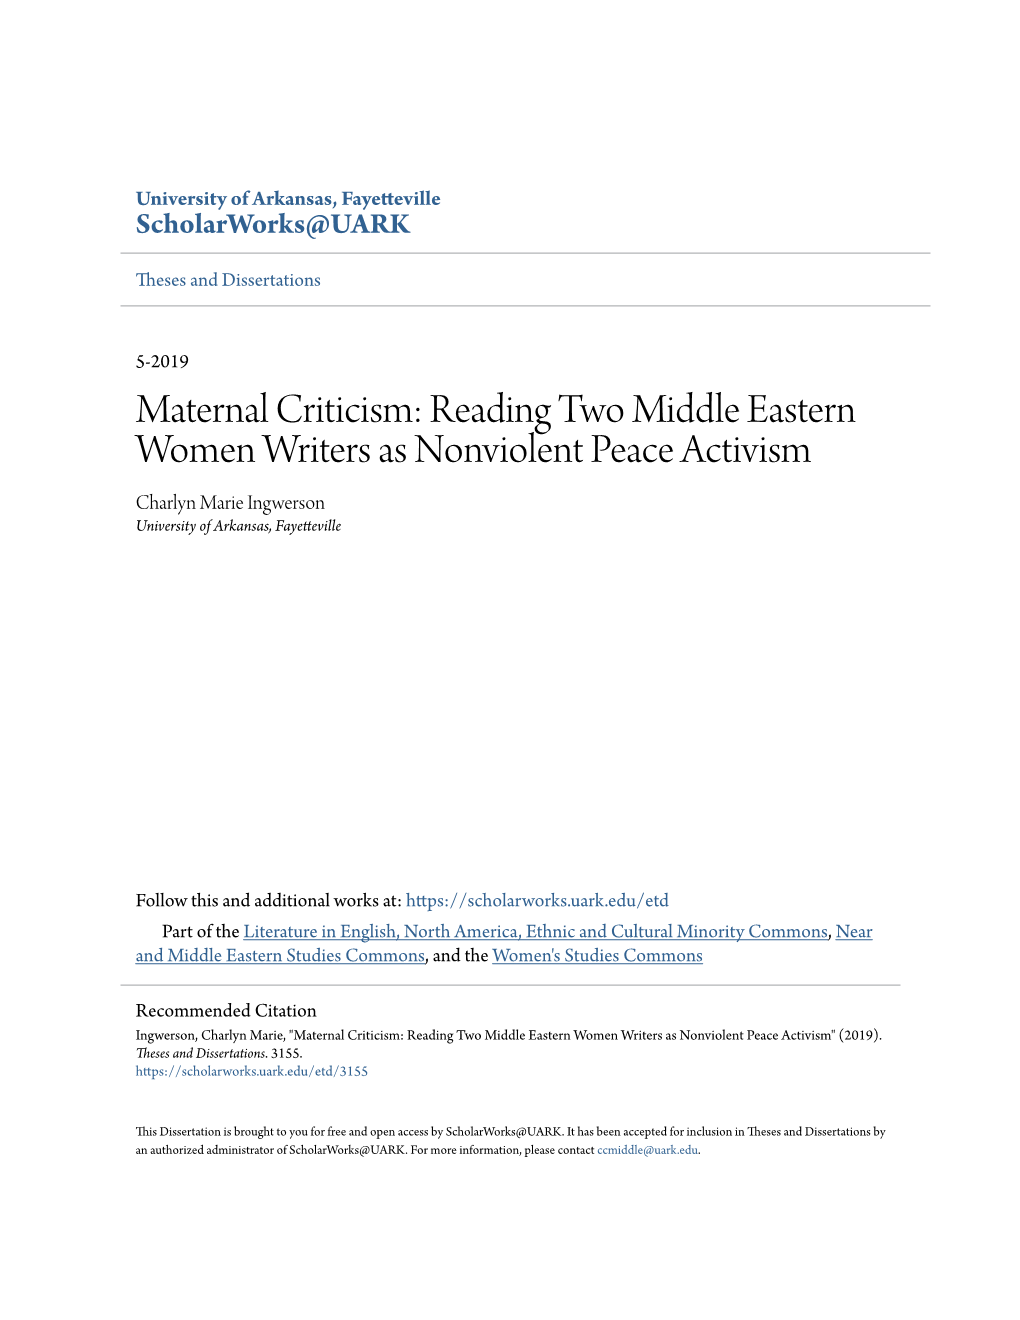 Reading Two Middle Eastern Women Writers As Nonviolent Peace Activism Charlyn Marie Ingwerson University of Arkansas, Fayetteville